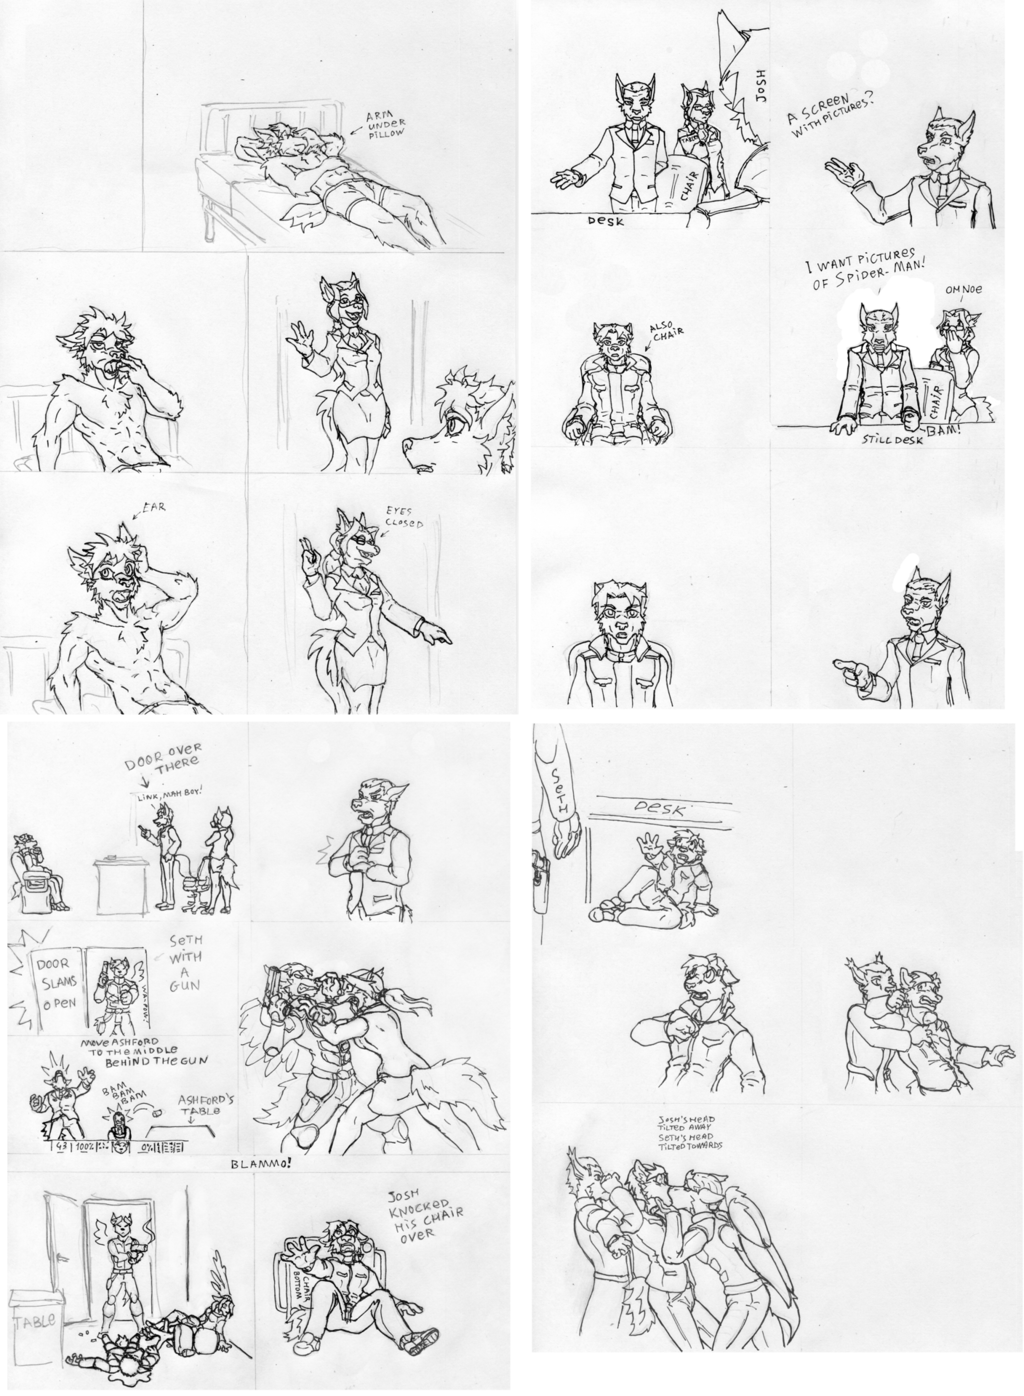 Project Future - Chapter 51 original sketches